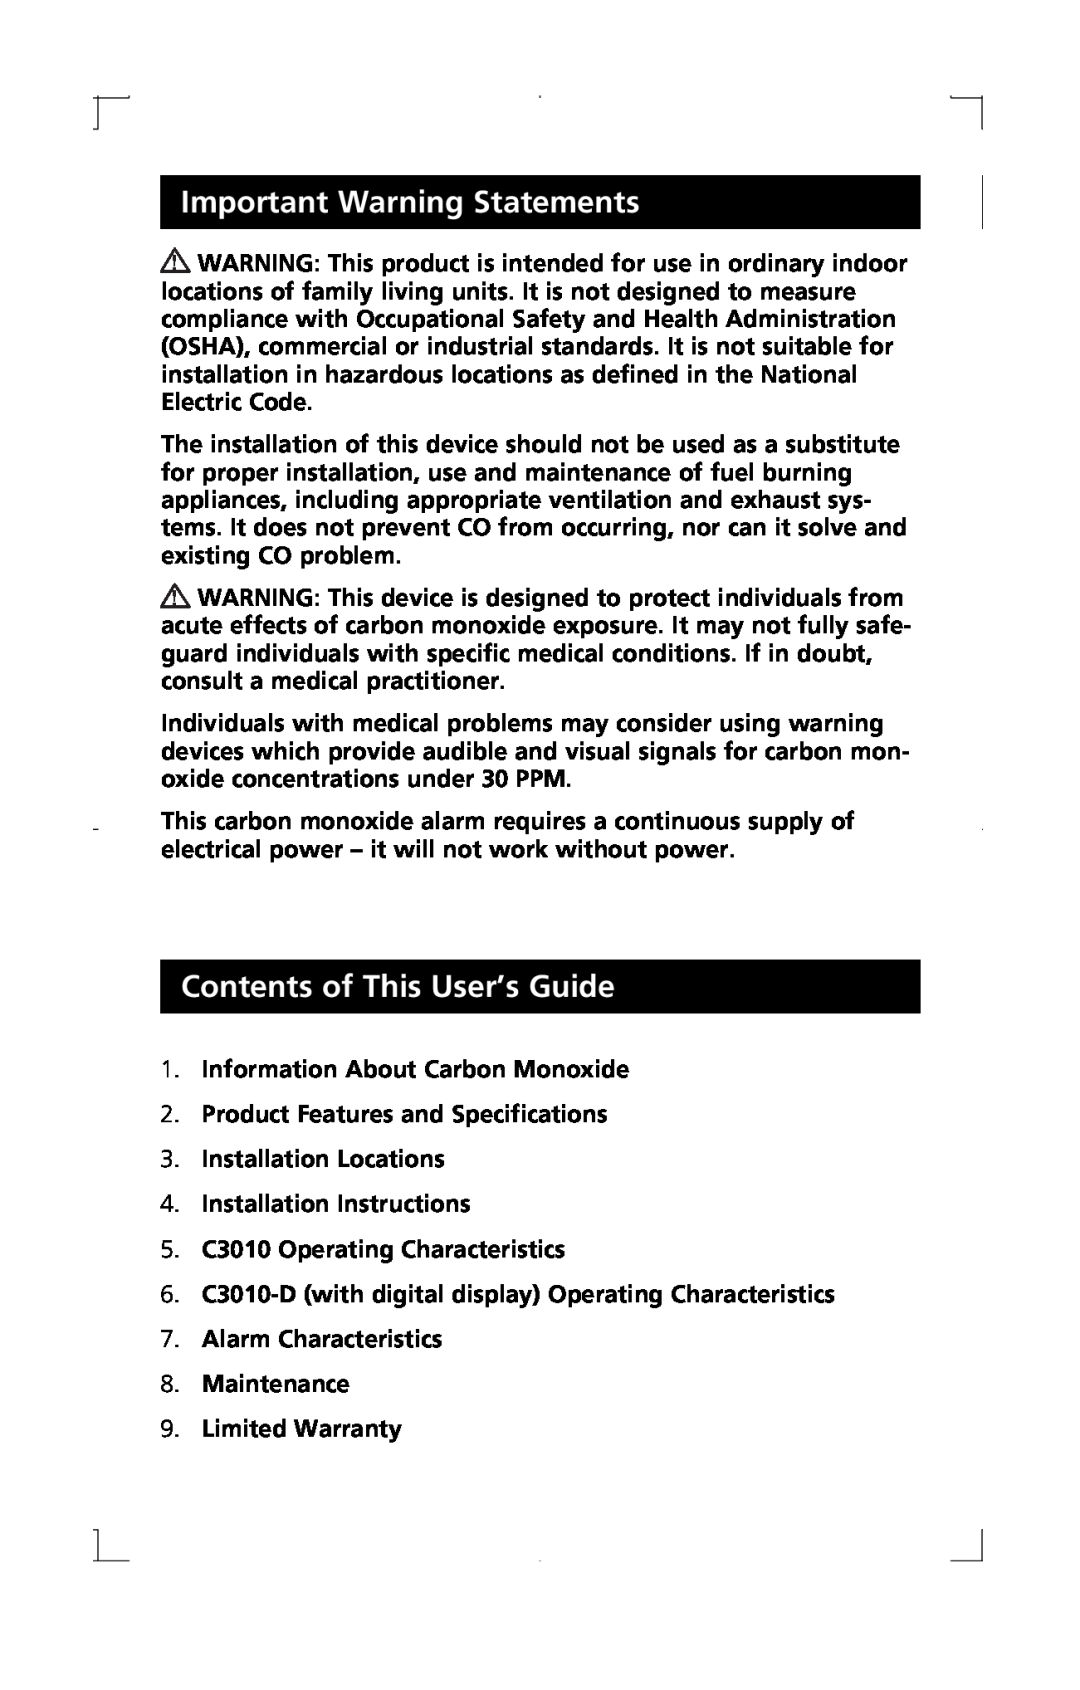 Kidde C3010-D manual Contents of This User’s Guide, Information About Carbon Monoxide, Product Features and Specifications 